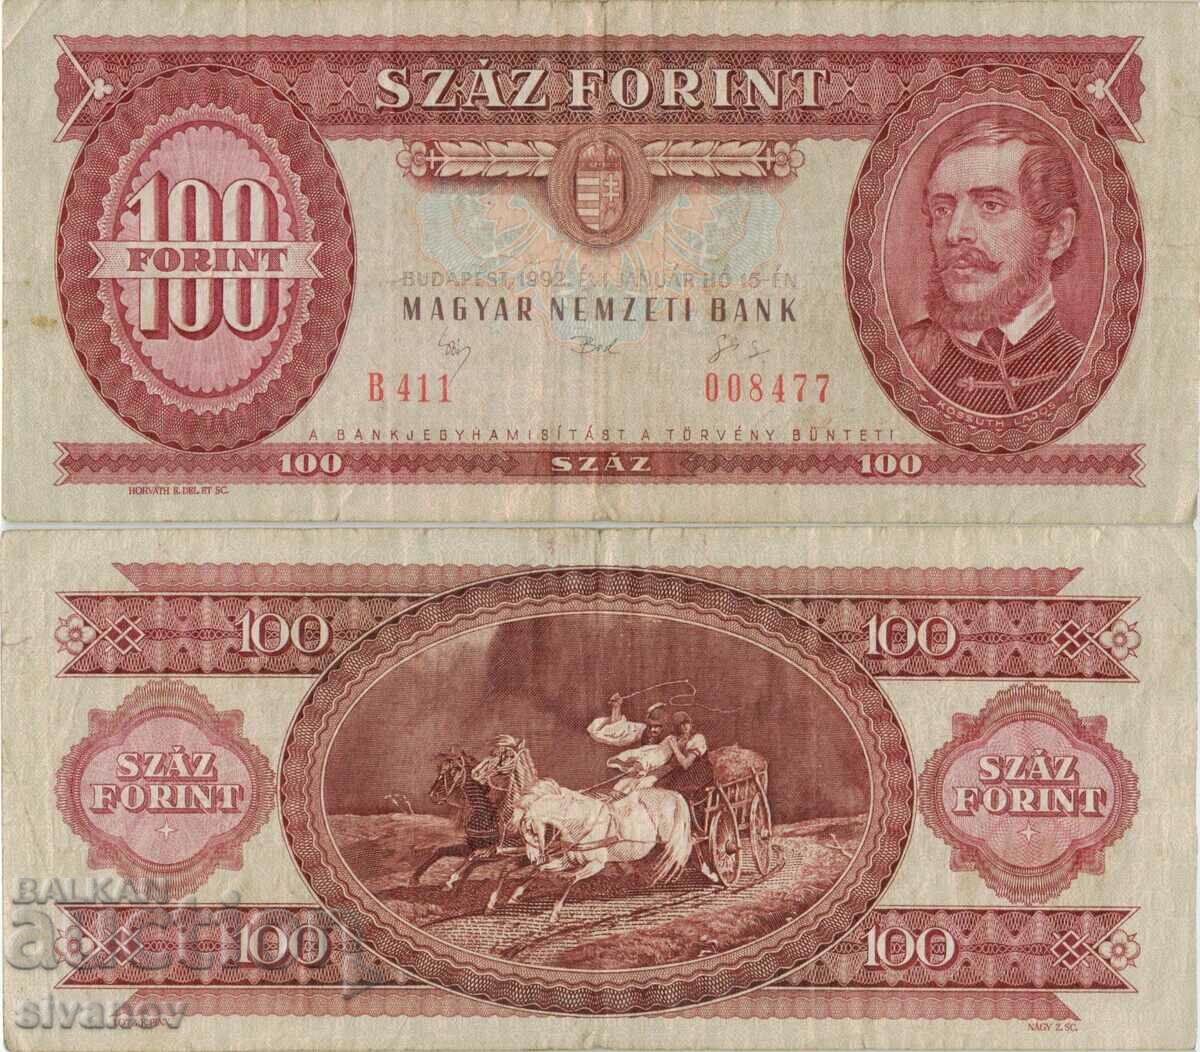 Hungary 100 forint 1992 banknote #5208